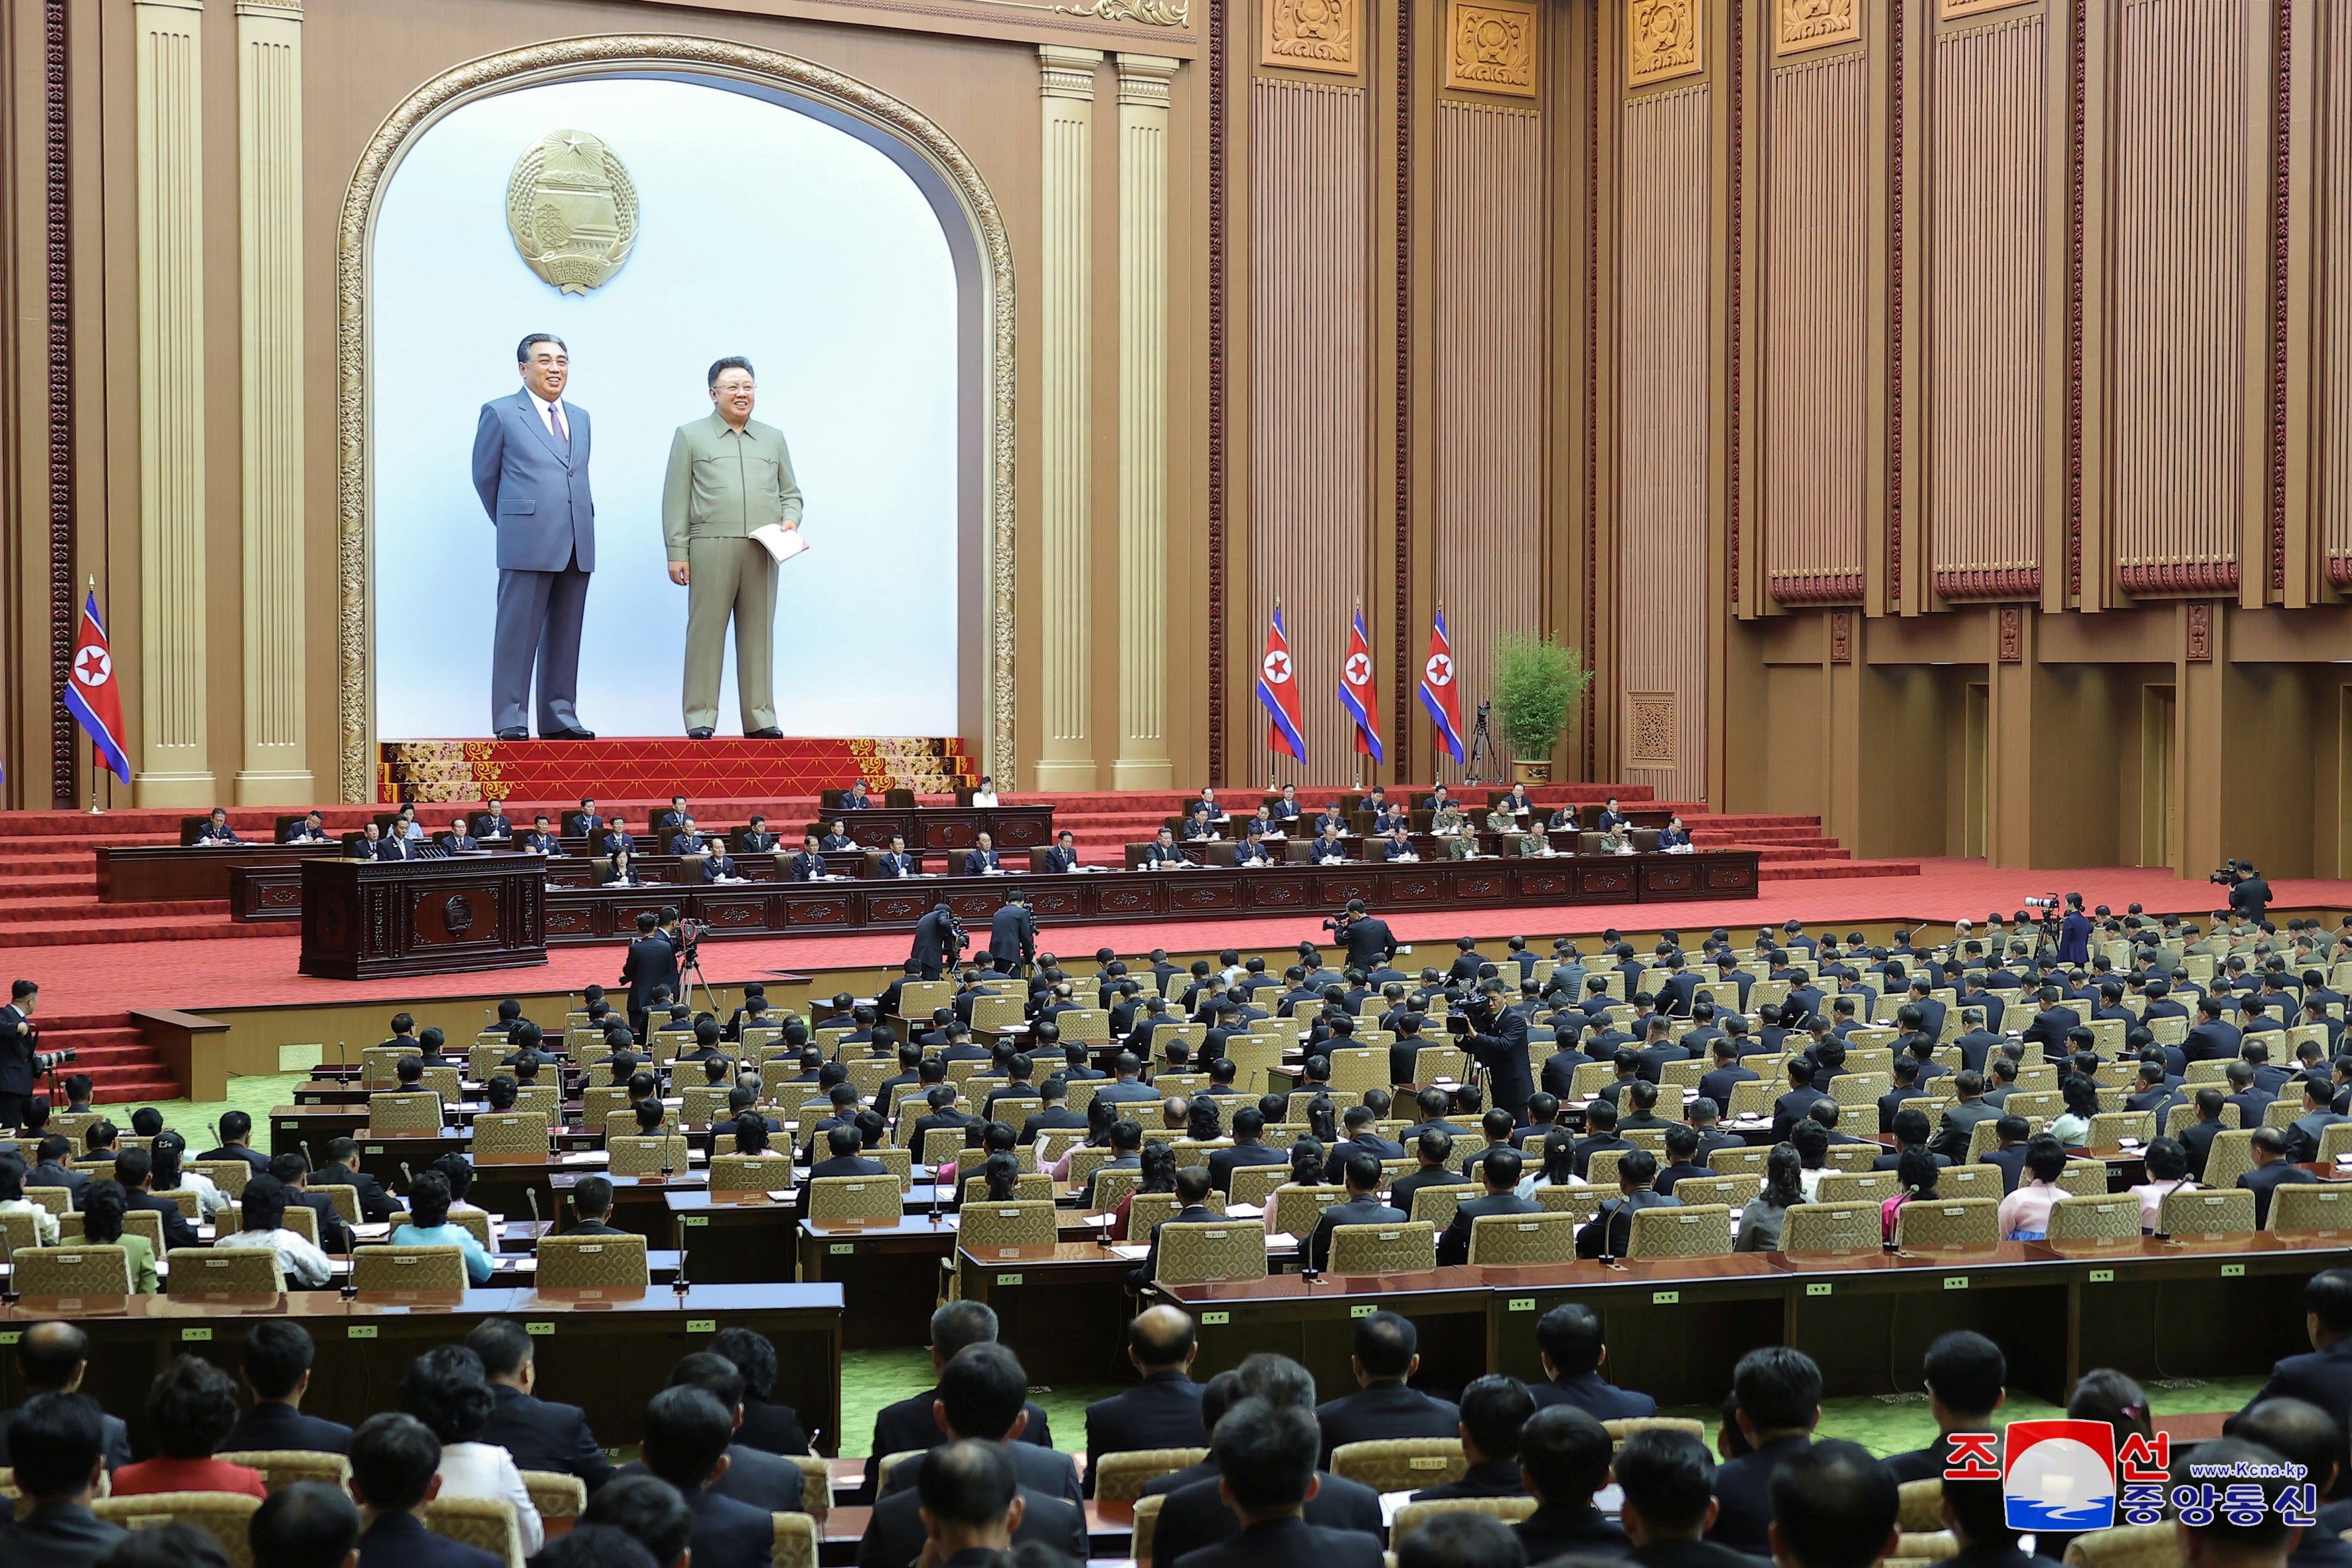 The 9th Session of the 14th Supreme People’s Assembly of the Democratic People’s Republic of Korea is held at the Mansudae Assembly Hall in Pyongyang in this undated photo received by Reuters on 28 September